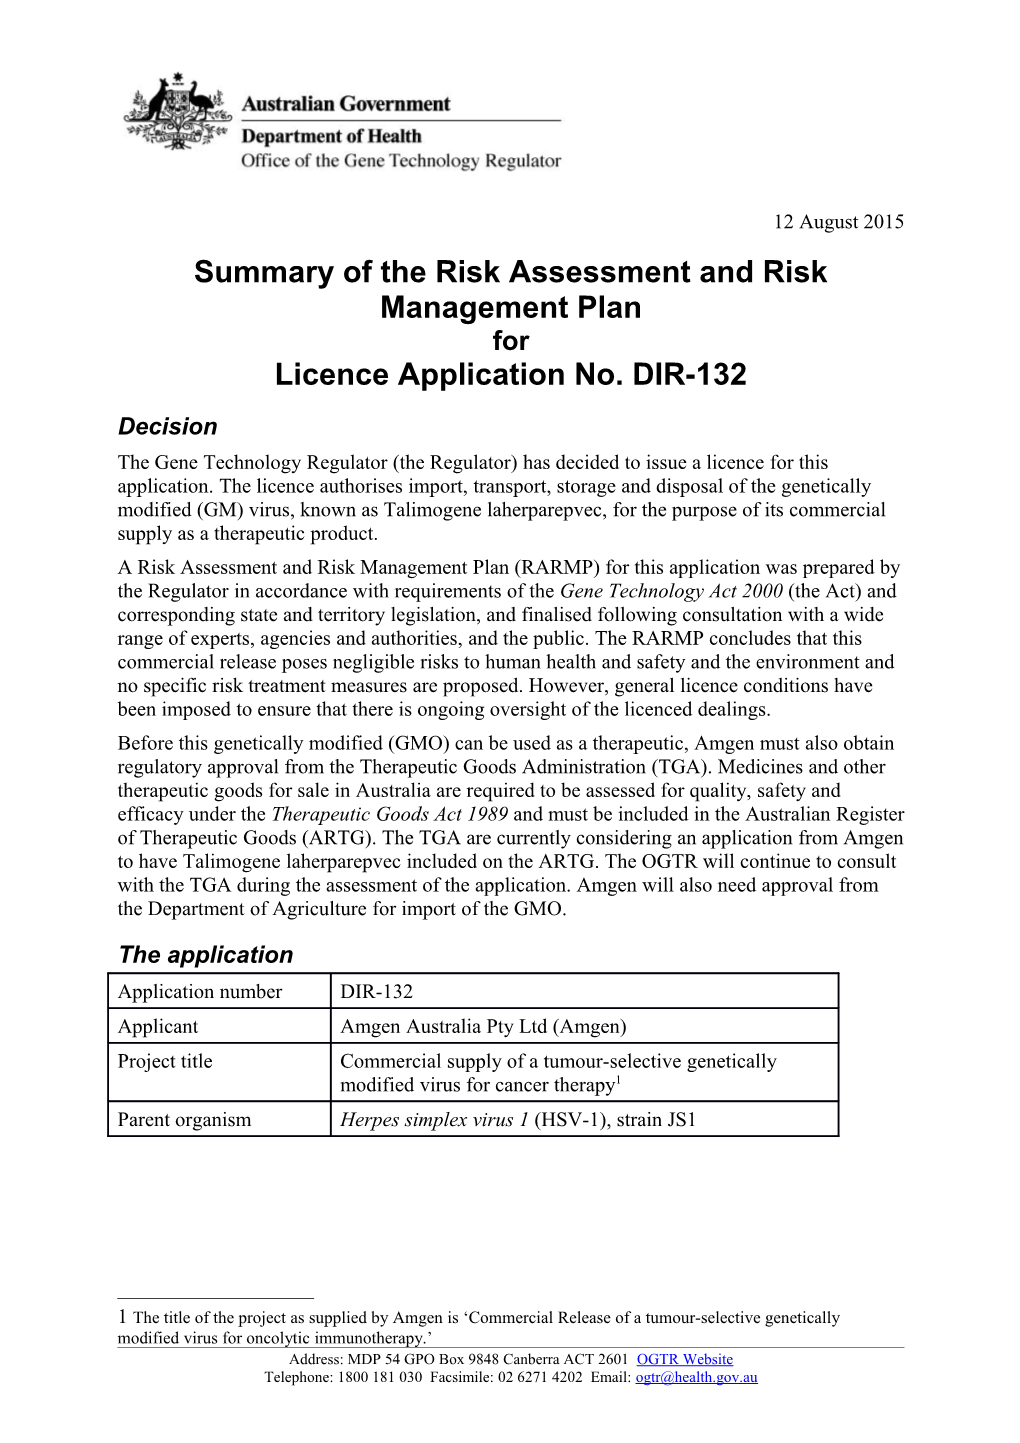 Summary of Risk Assessment and Risk Management Plan